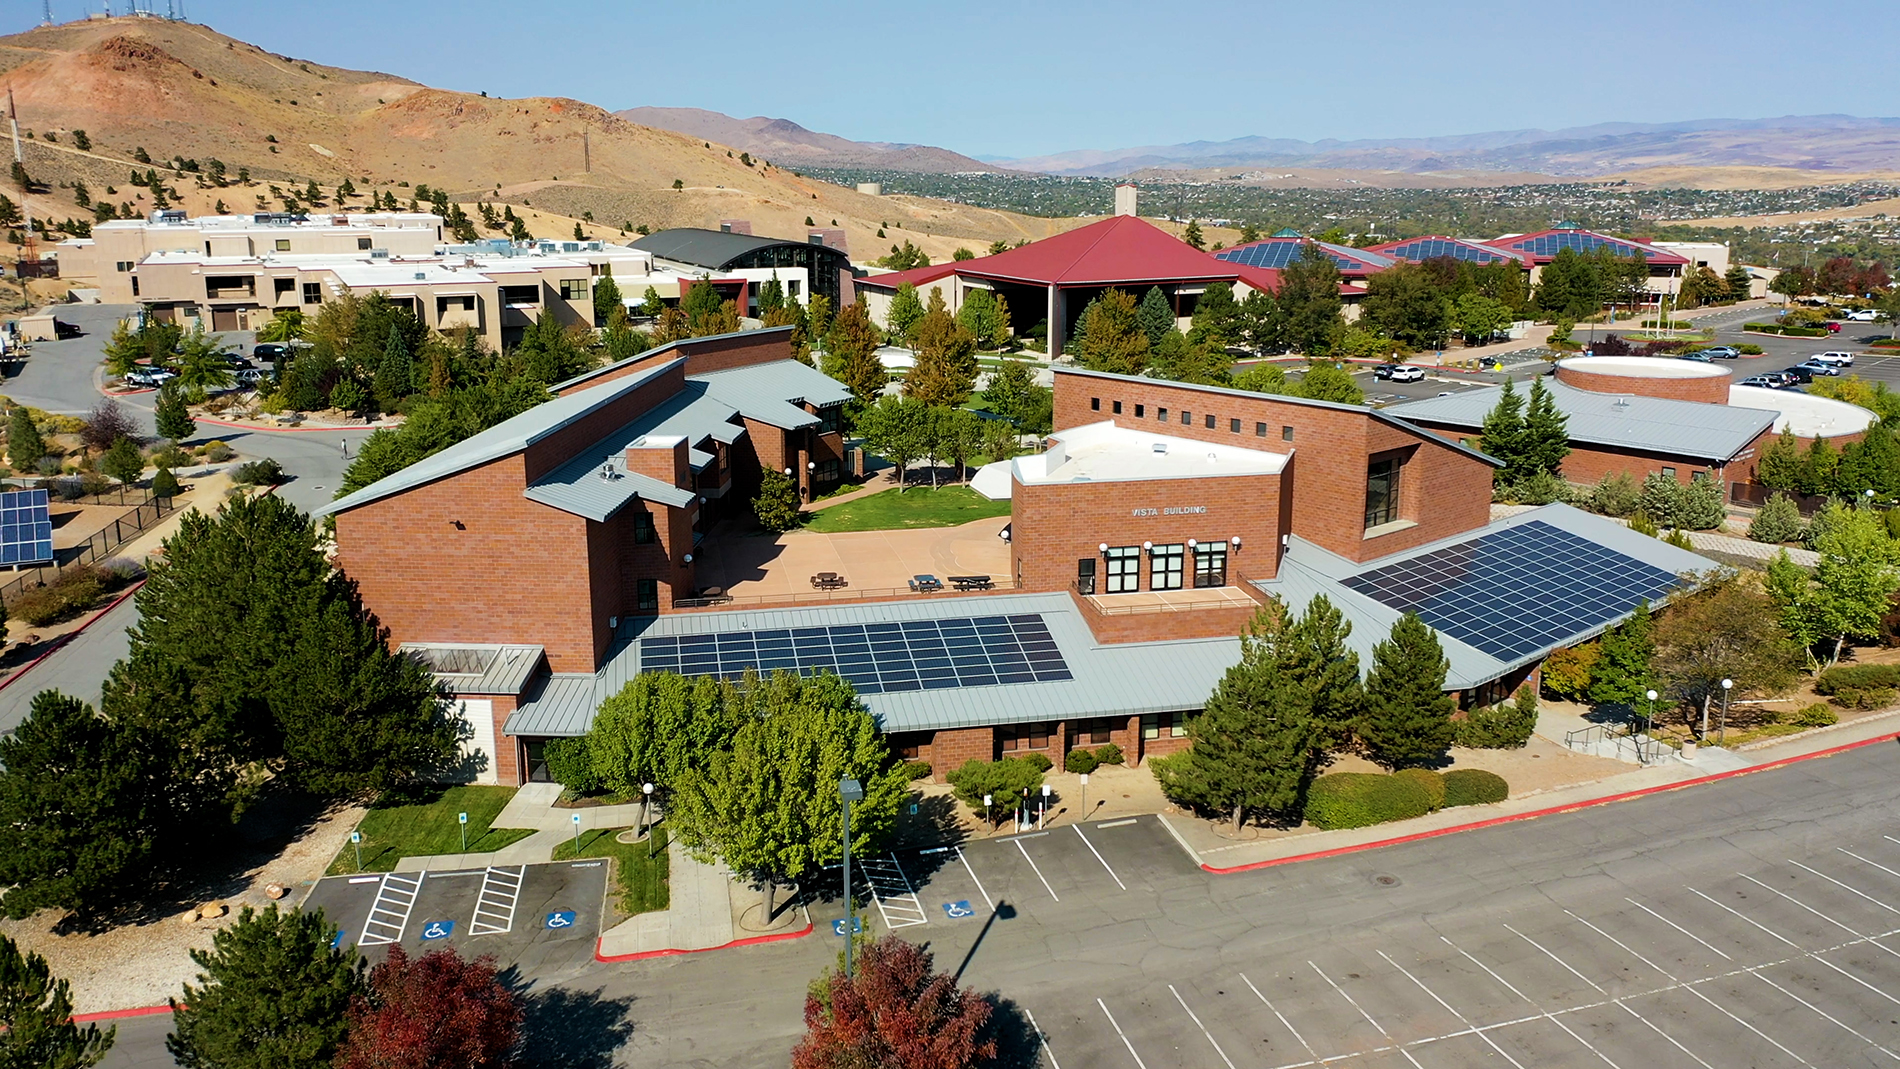 Photo of Truckee meadows community college campus